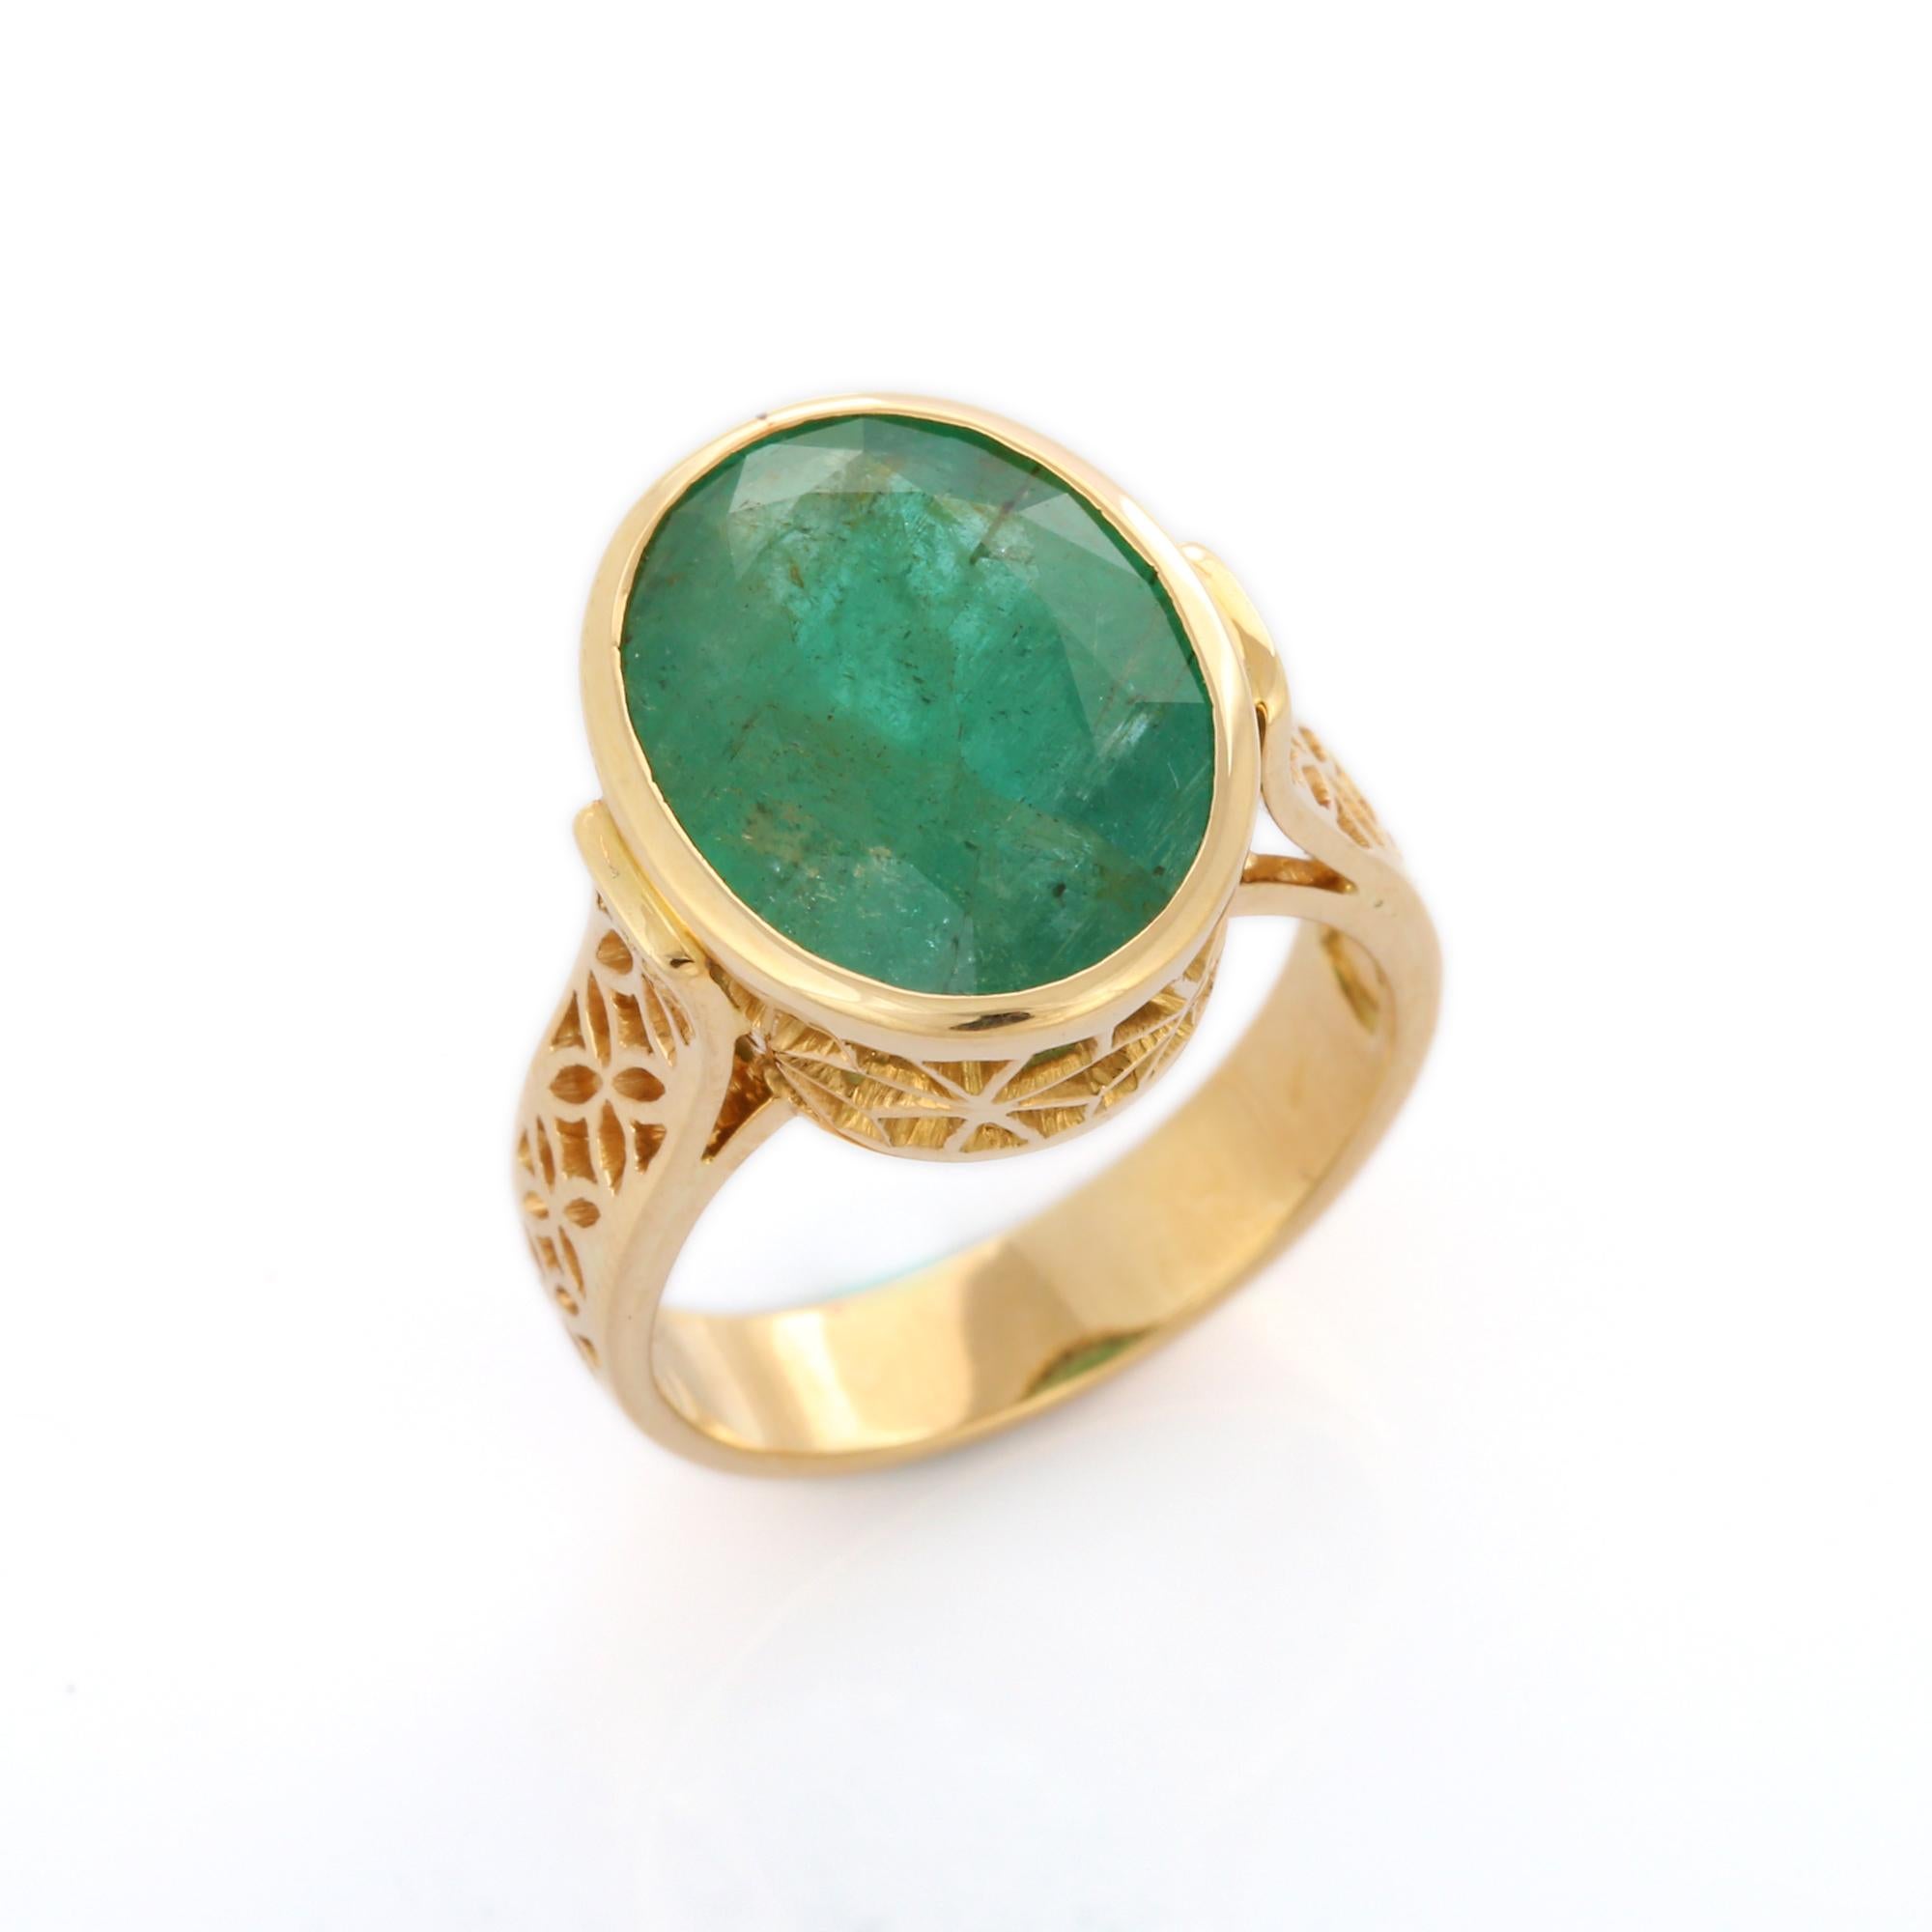 For Sale:  Natural Certified 7.76 Carats Emerald Ring in 18k Solid Yellow Gold 5